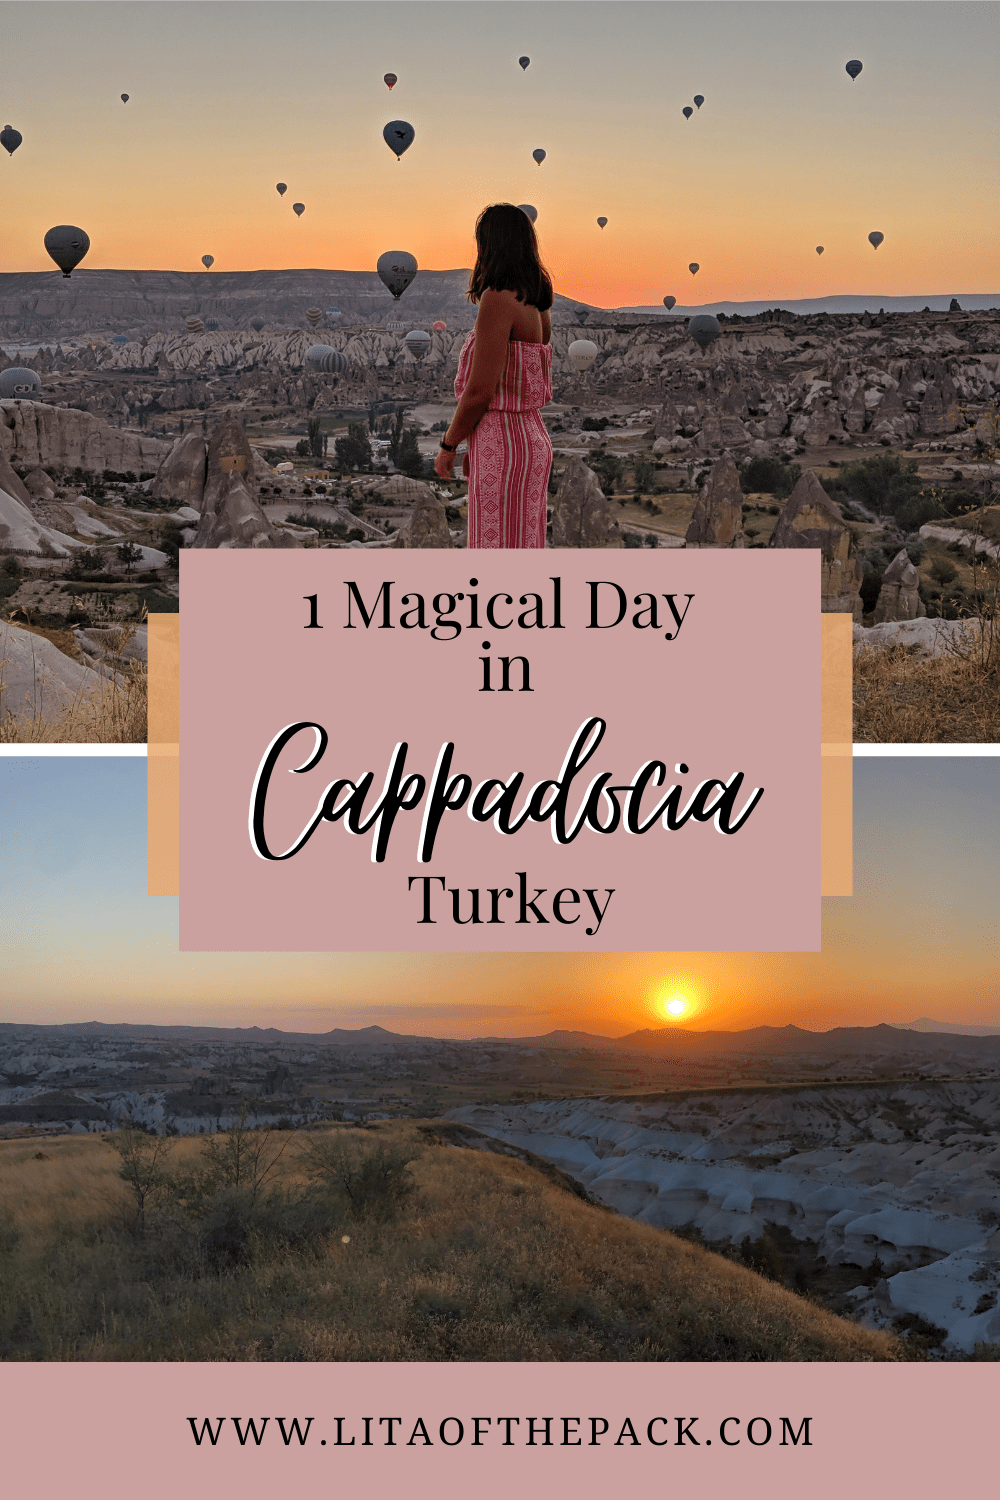 two pictures of Cappadocia, one with girl and balloons and another of sunset